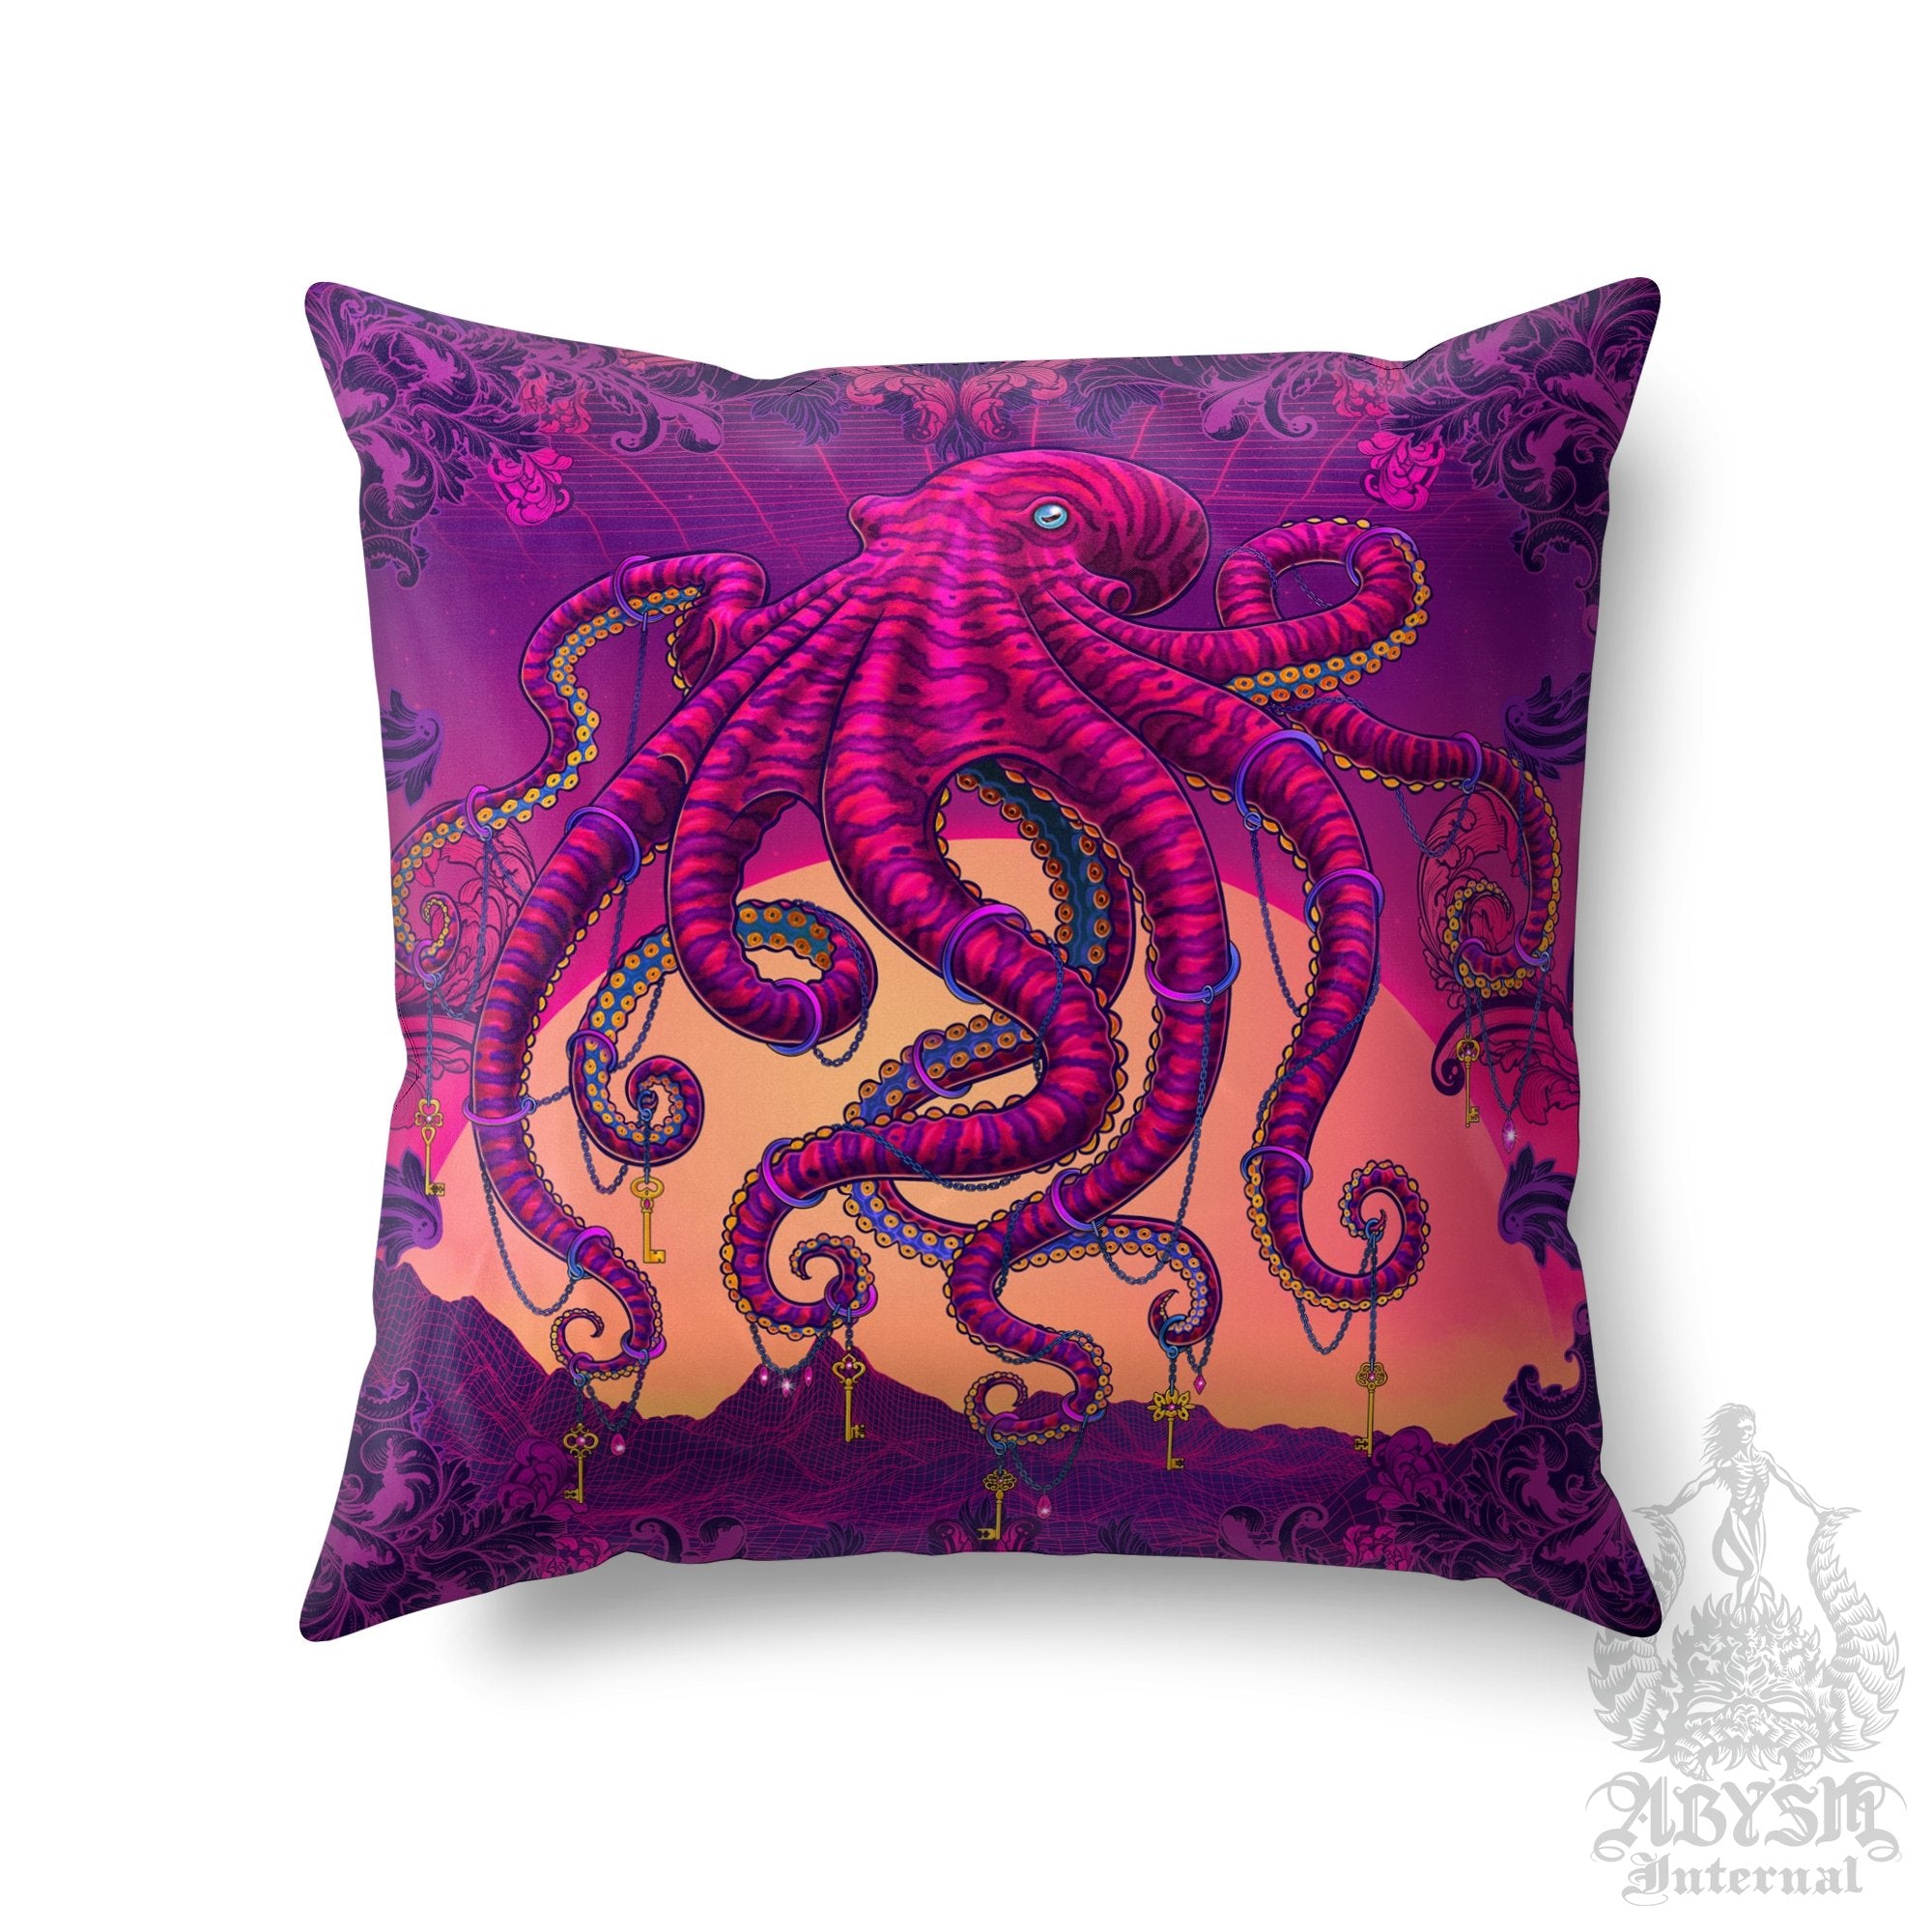 Vaporwave Throw Pillow, Synthwave Decorative Accent Cushion, Retrowave 80s Room Decor, Psychedelic Art Print - Octopus - Abysm Internal